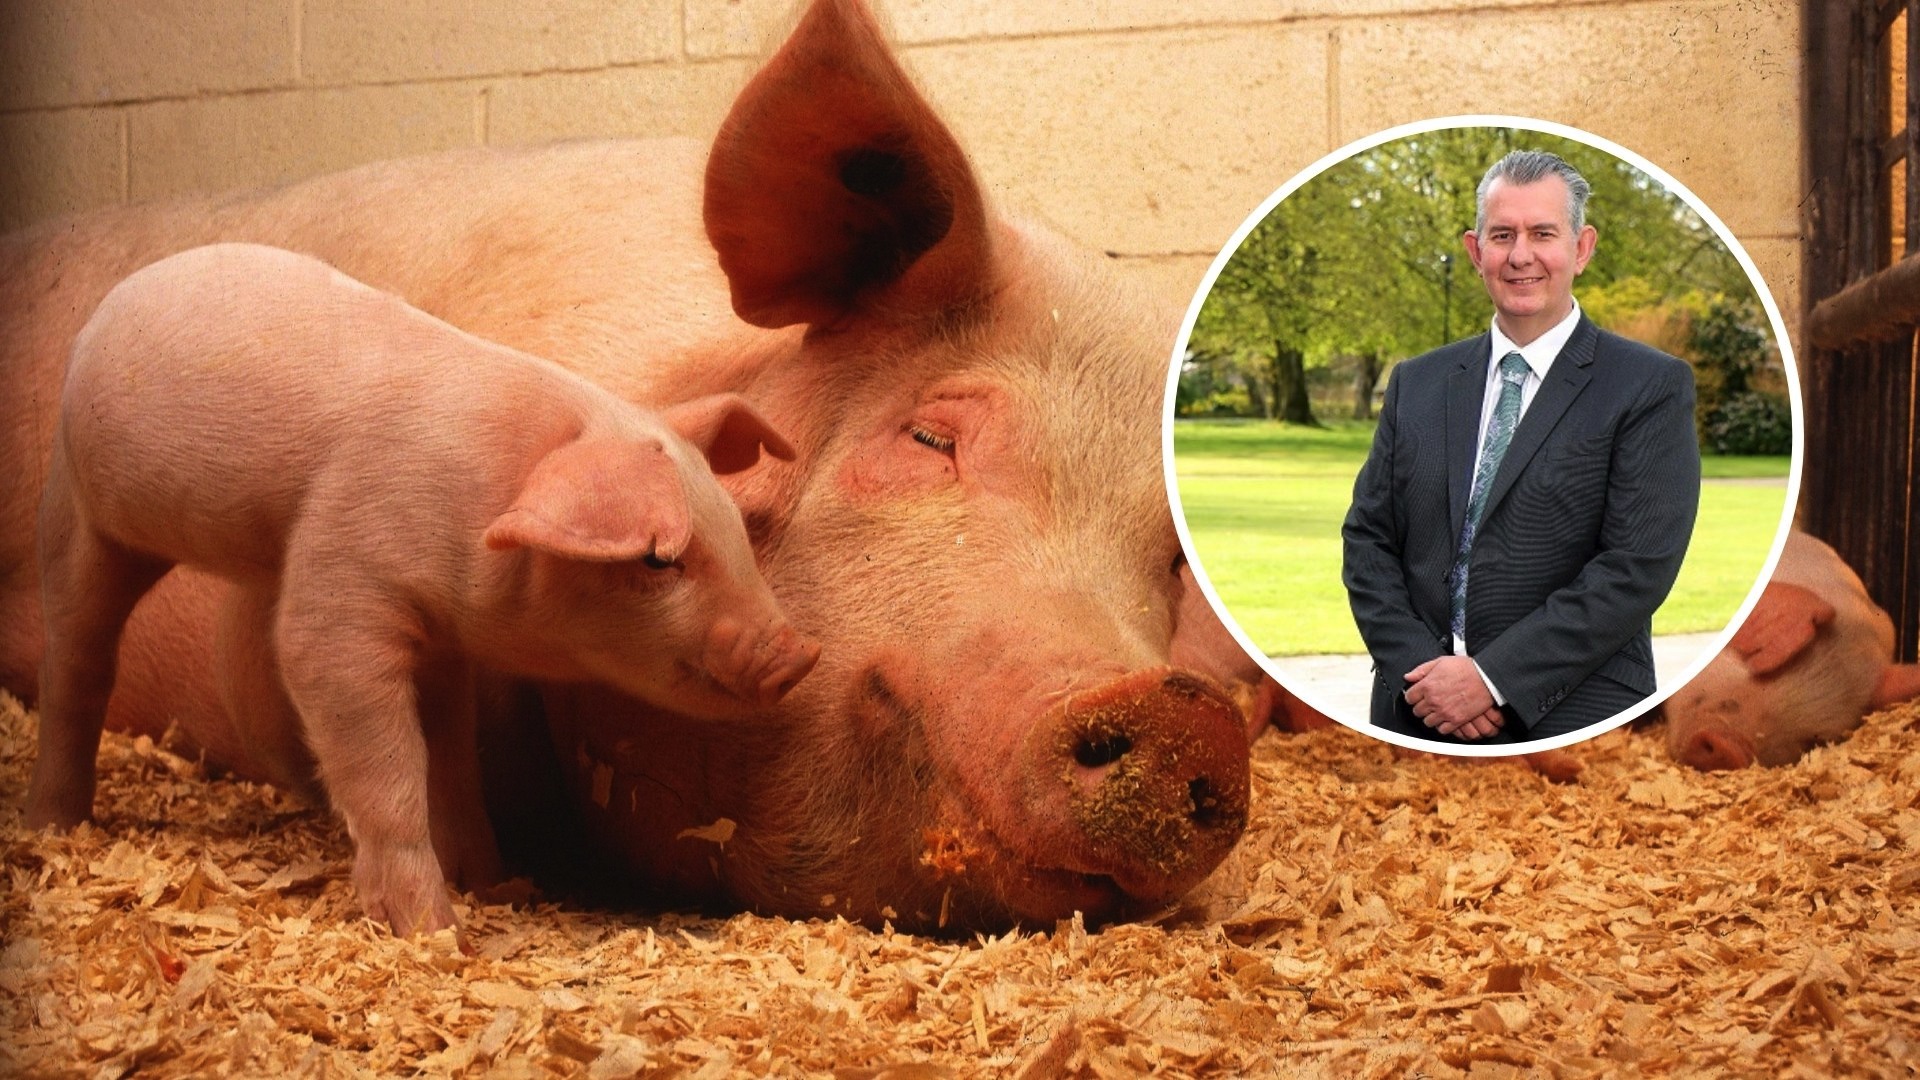 Poots announces £2million support package for local pig farmers | Newry Times - todays news in newry